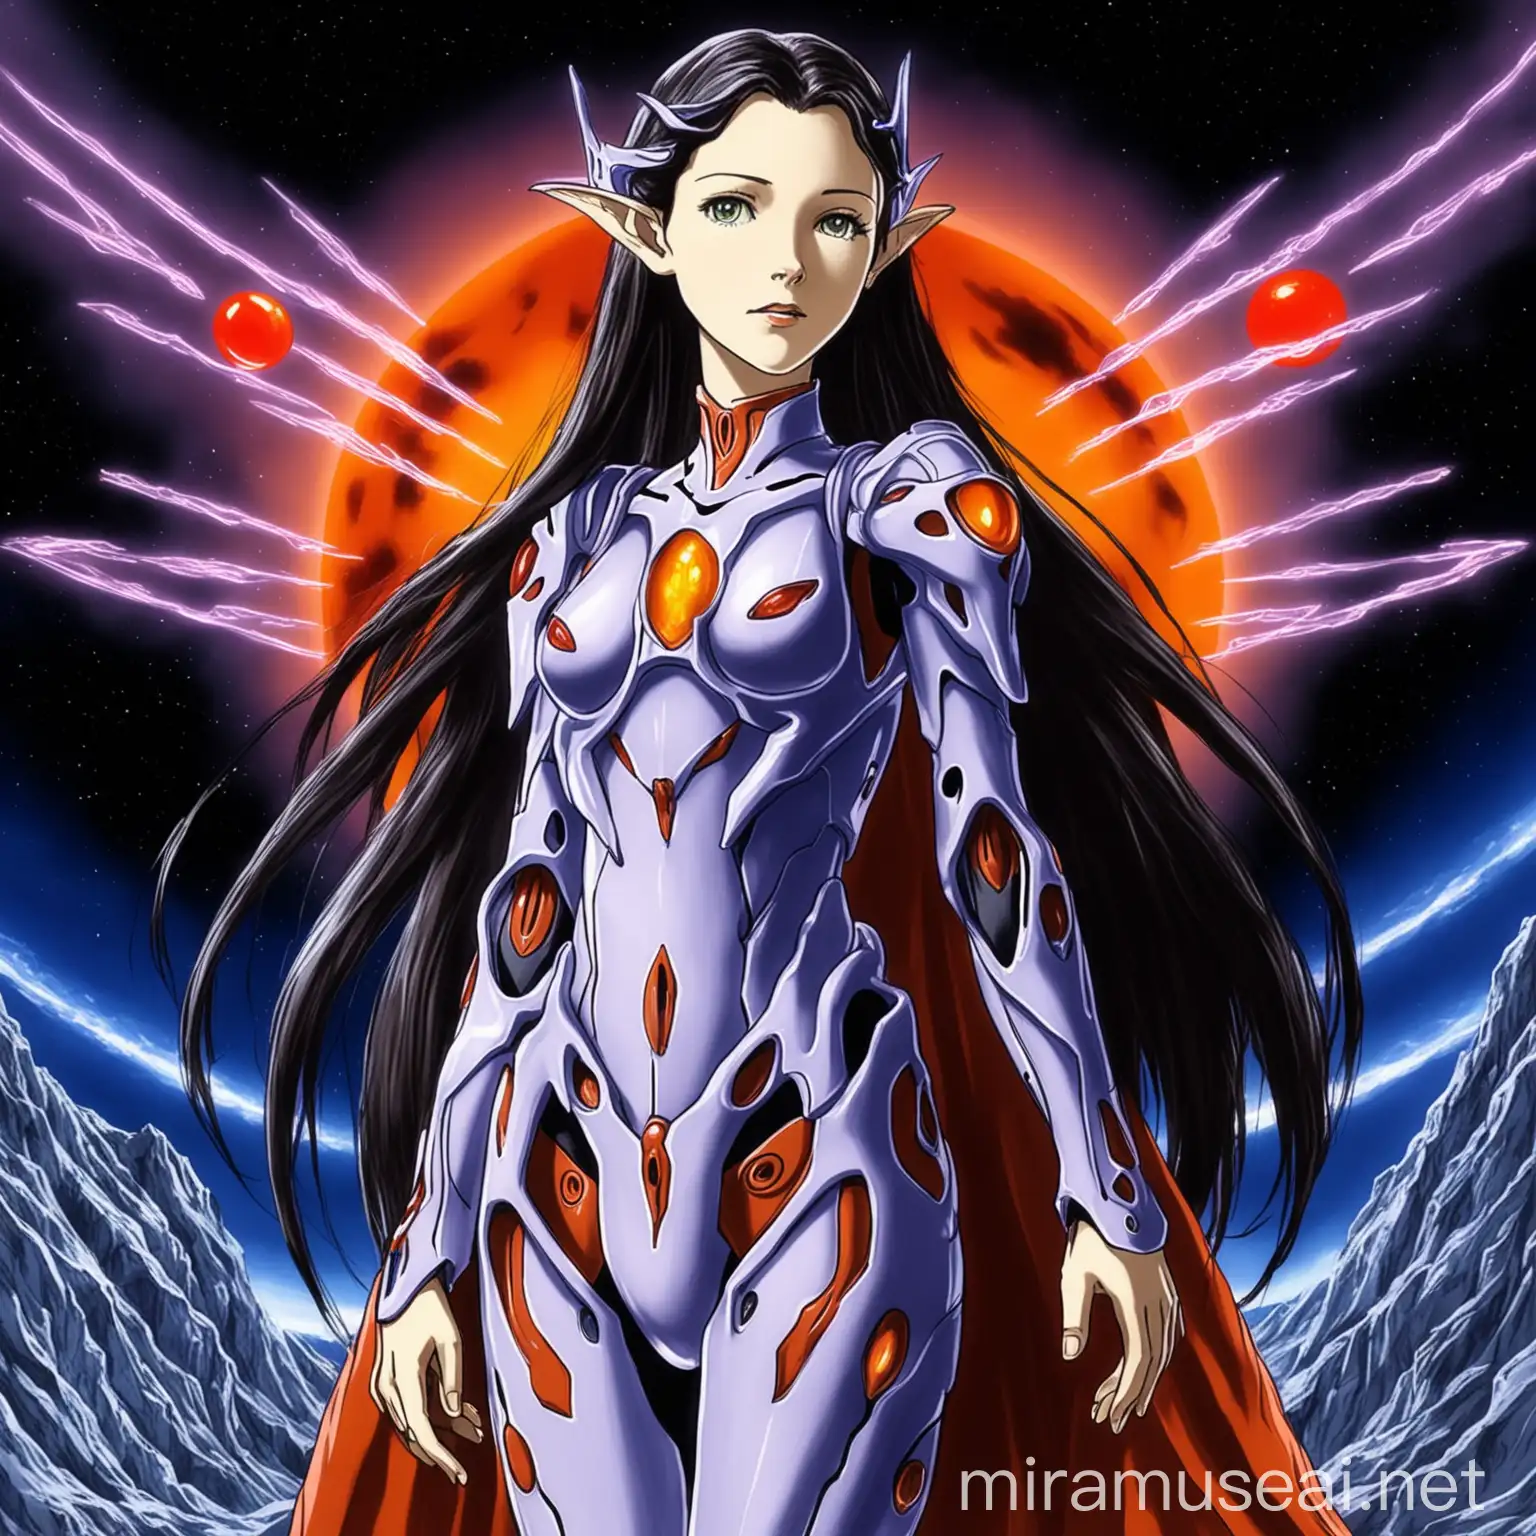 arwen from lord of the rings as neon genesis evangelion character